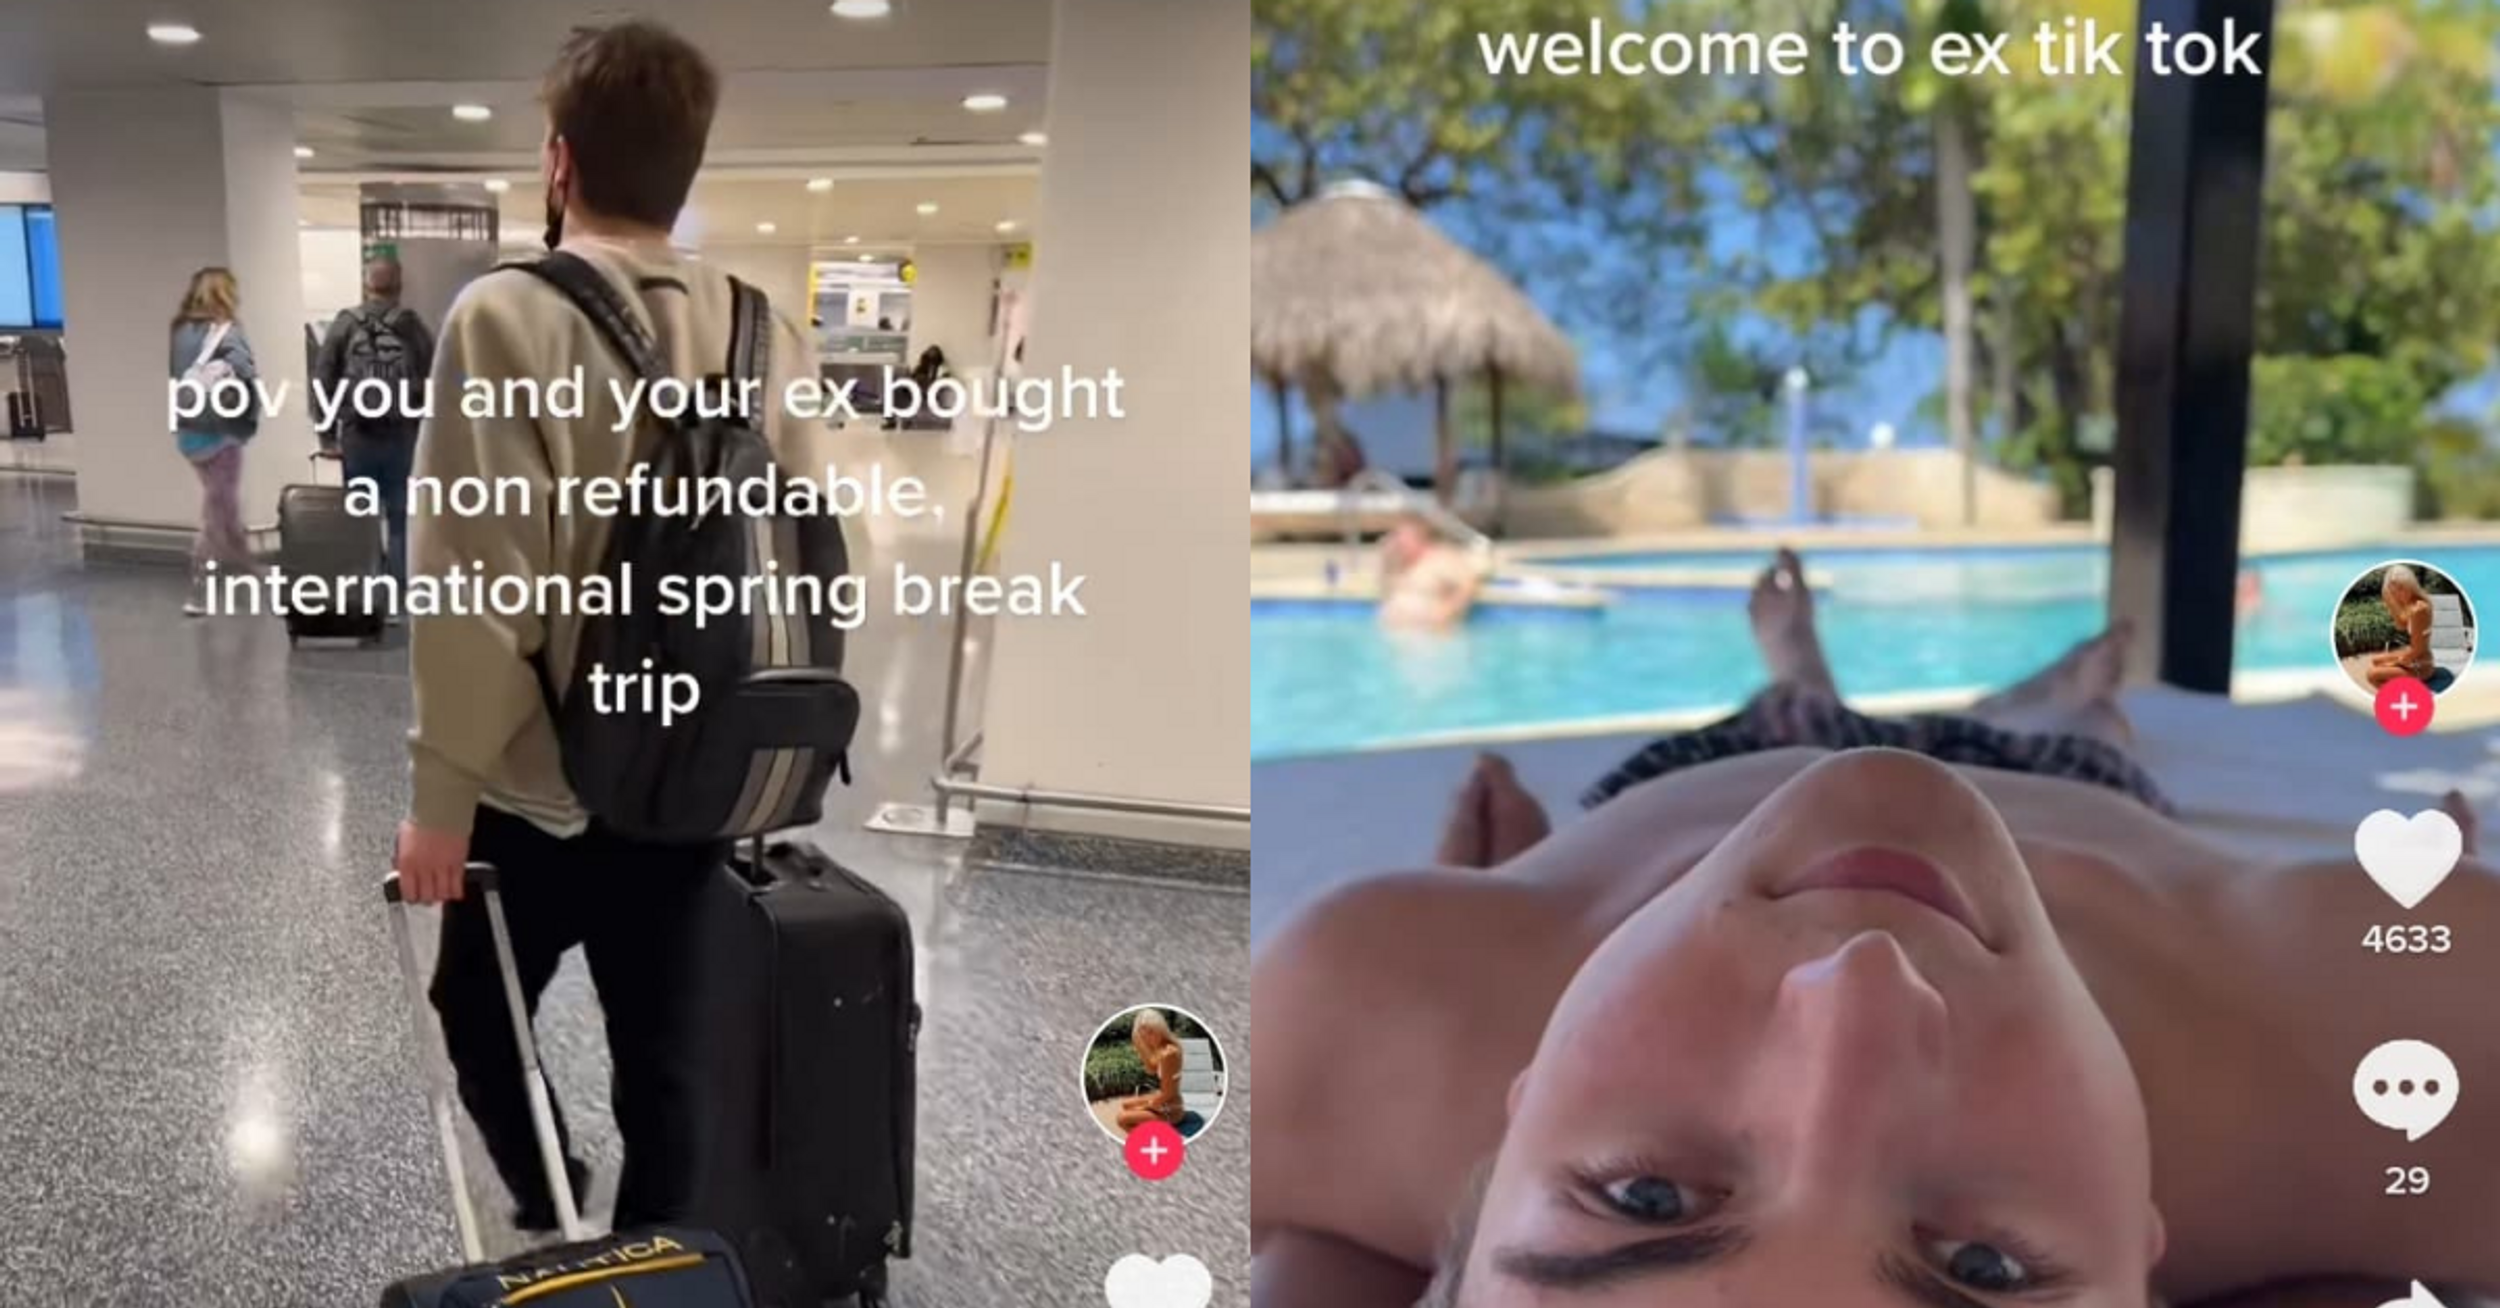 Woman Documents Going On Nonrefundable Tropical Vacation With Her Ex In Viral TikTok Videos